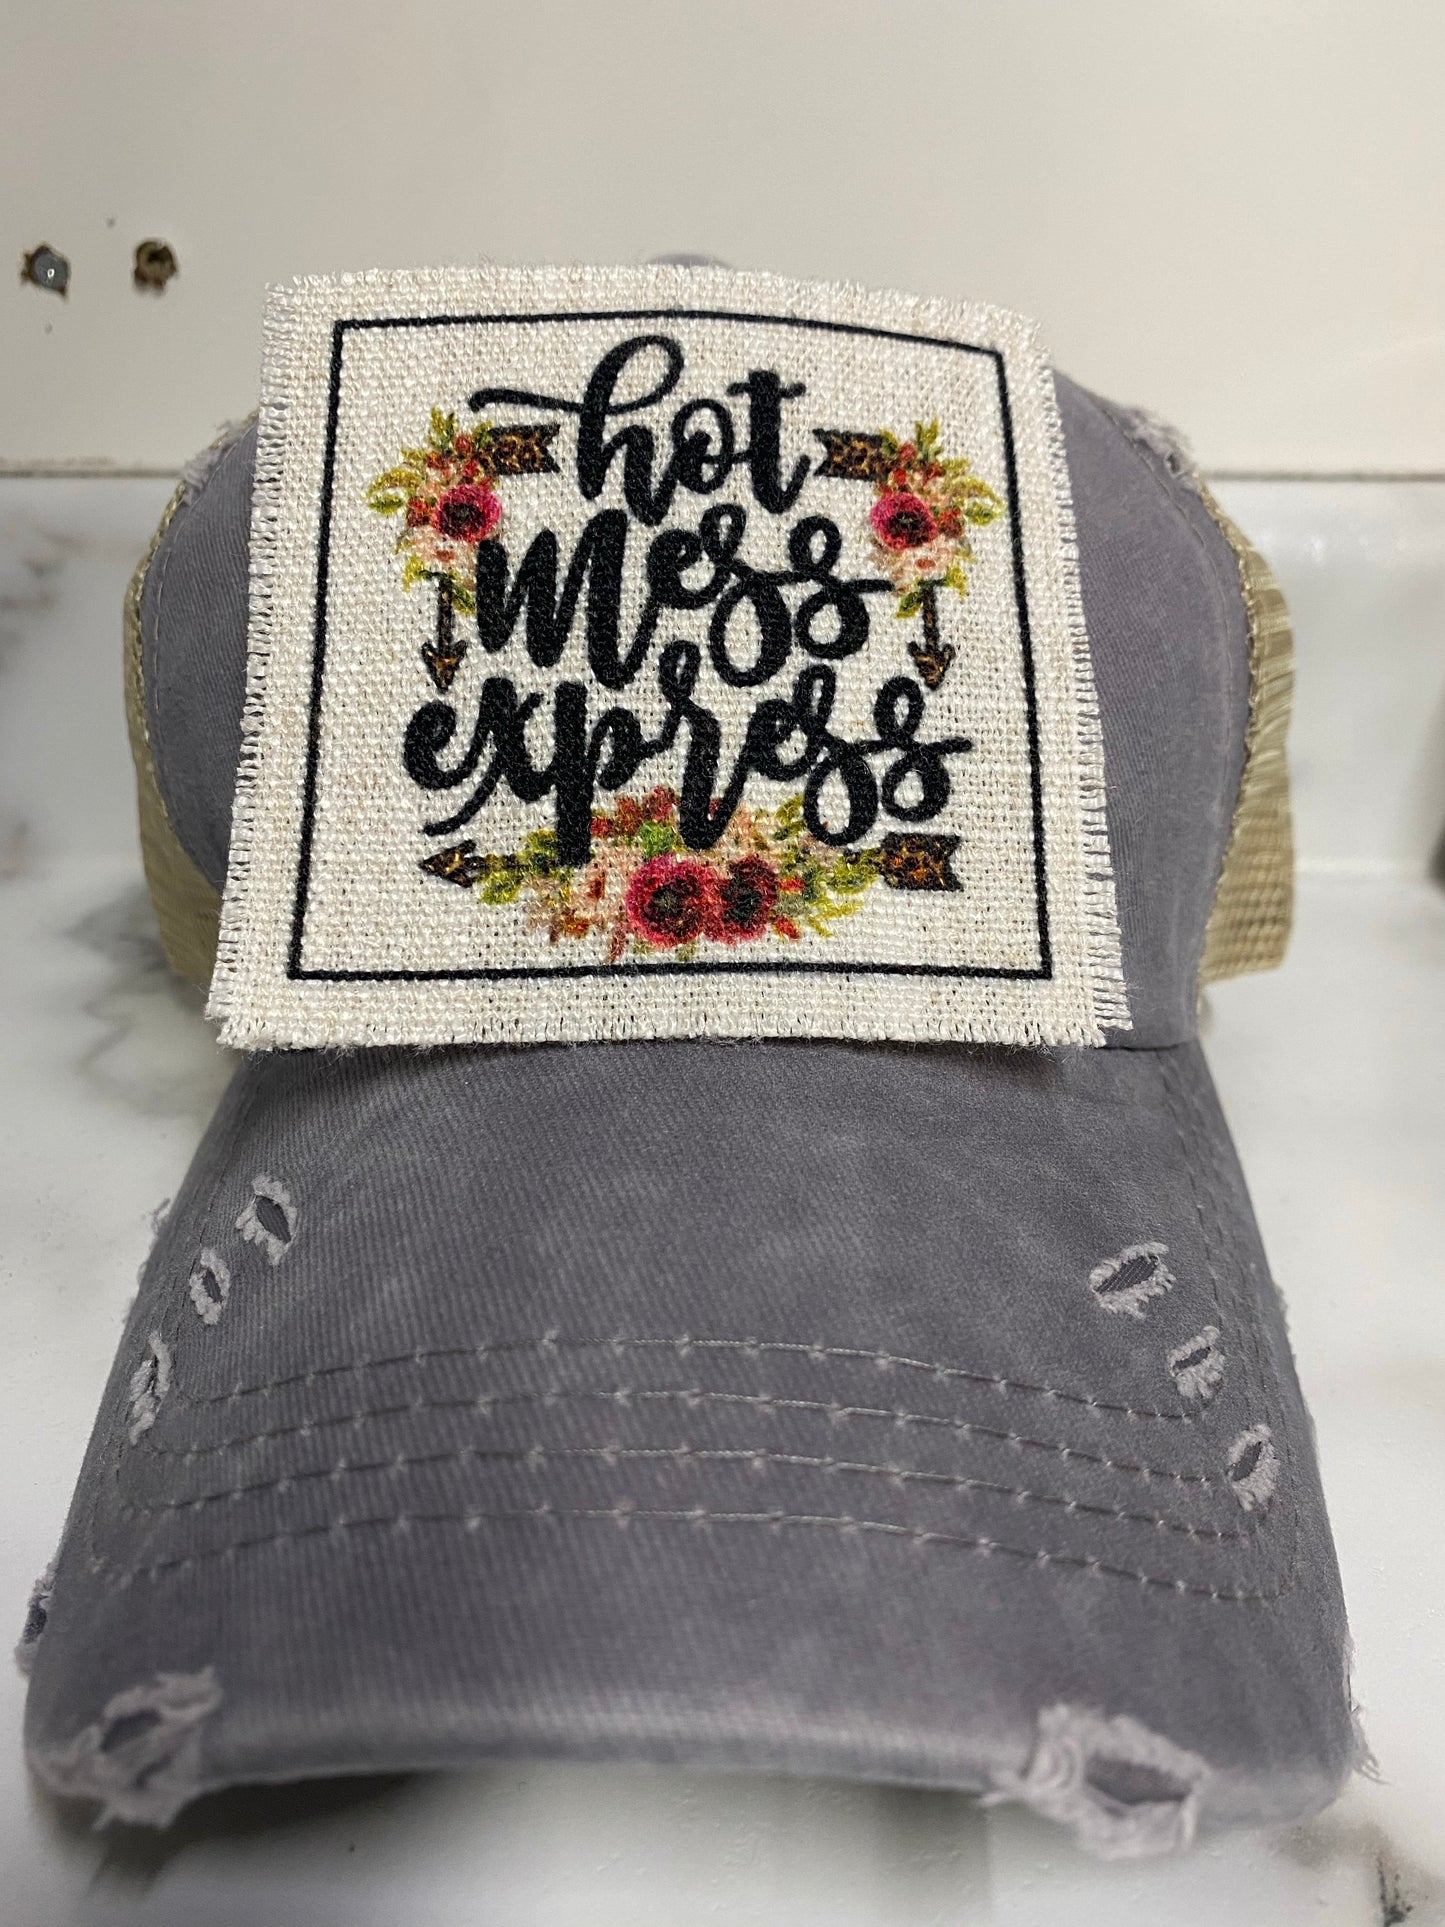 Hot Mess Express Hat Patch